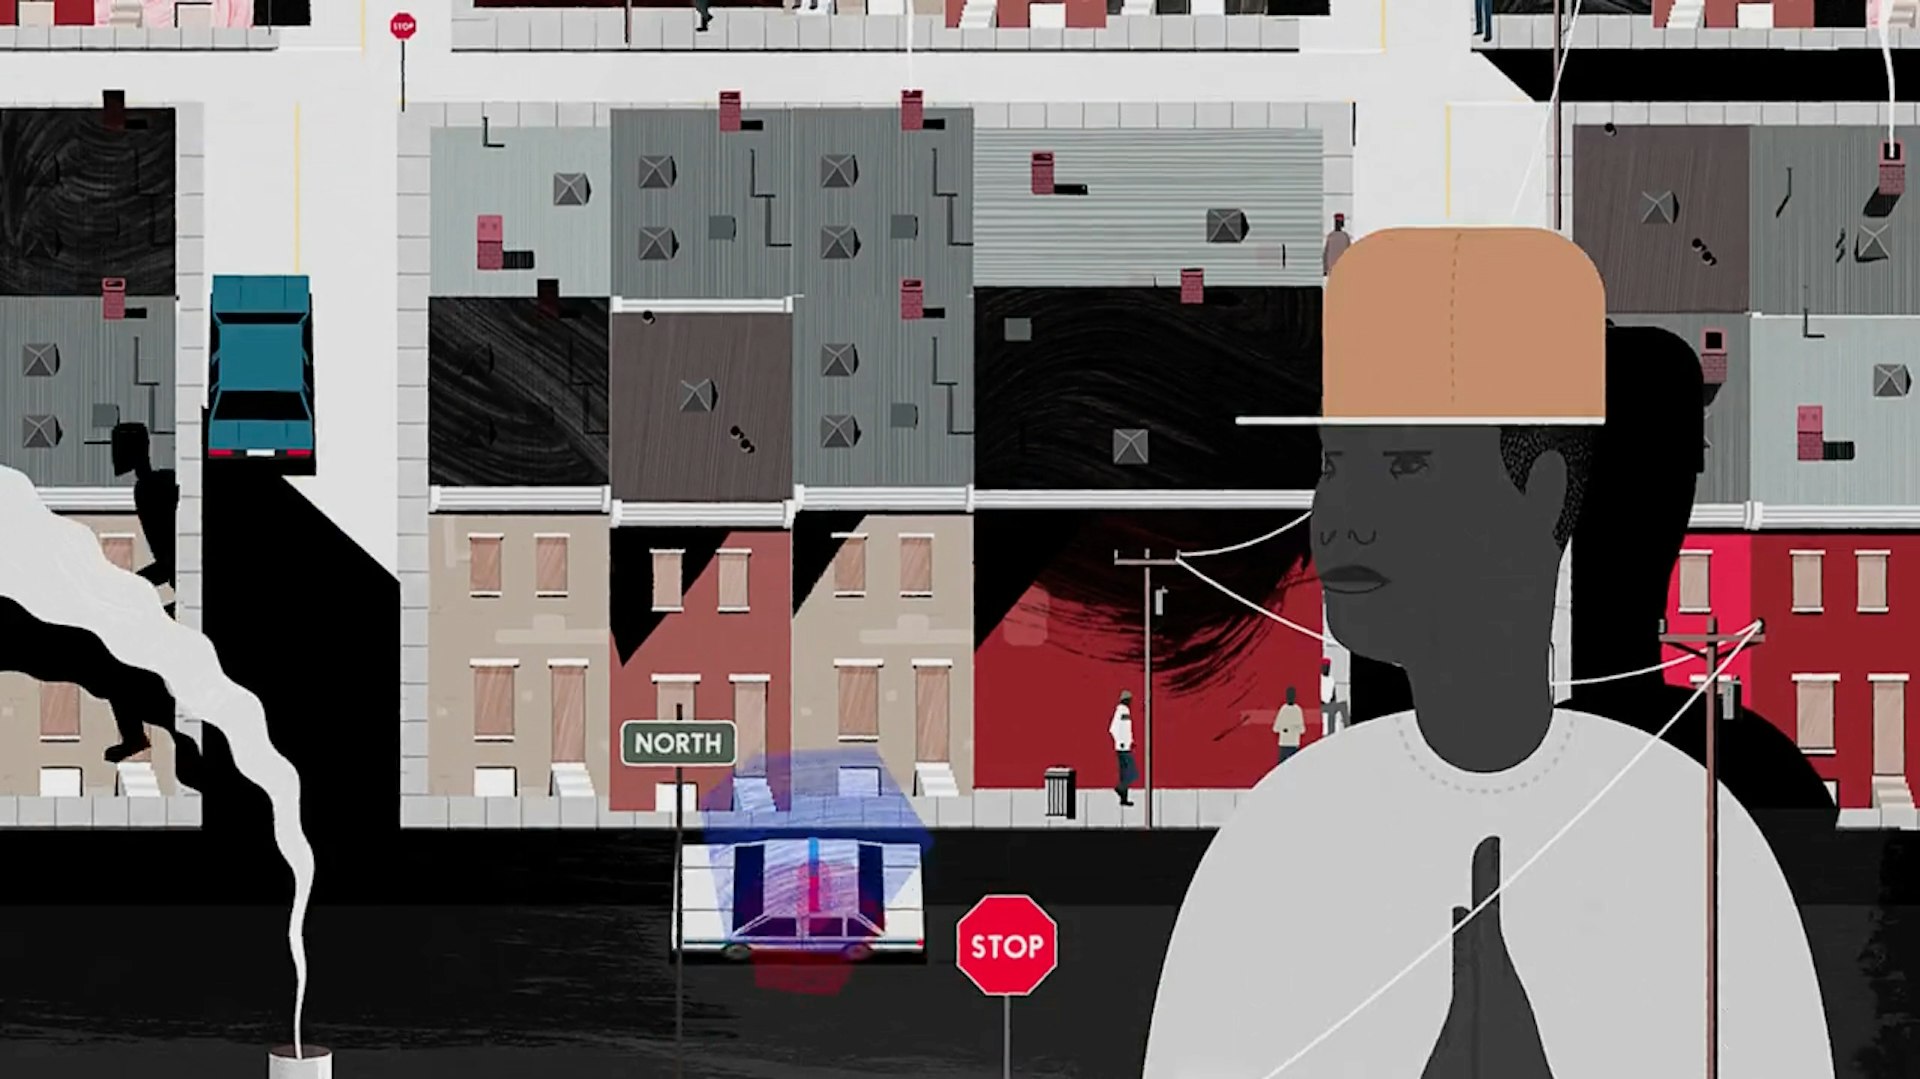 Video: A slick animated reworking of HBO’s The Wire